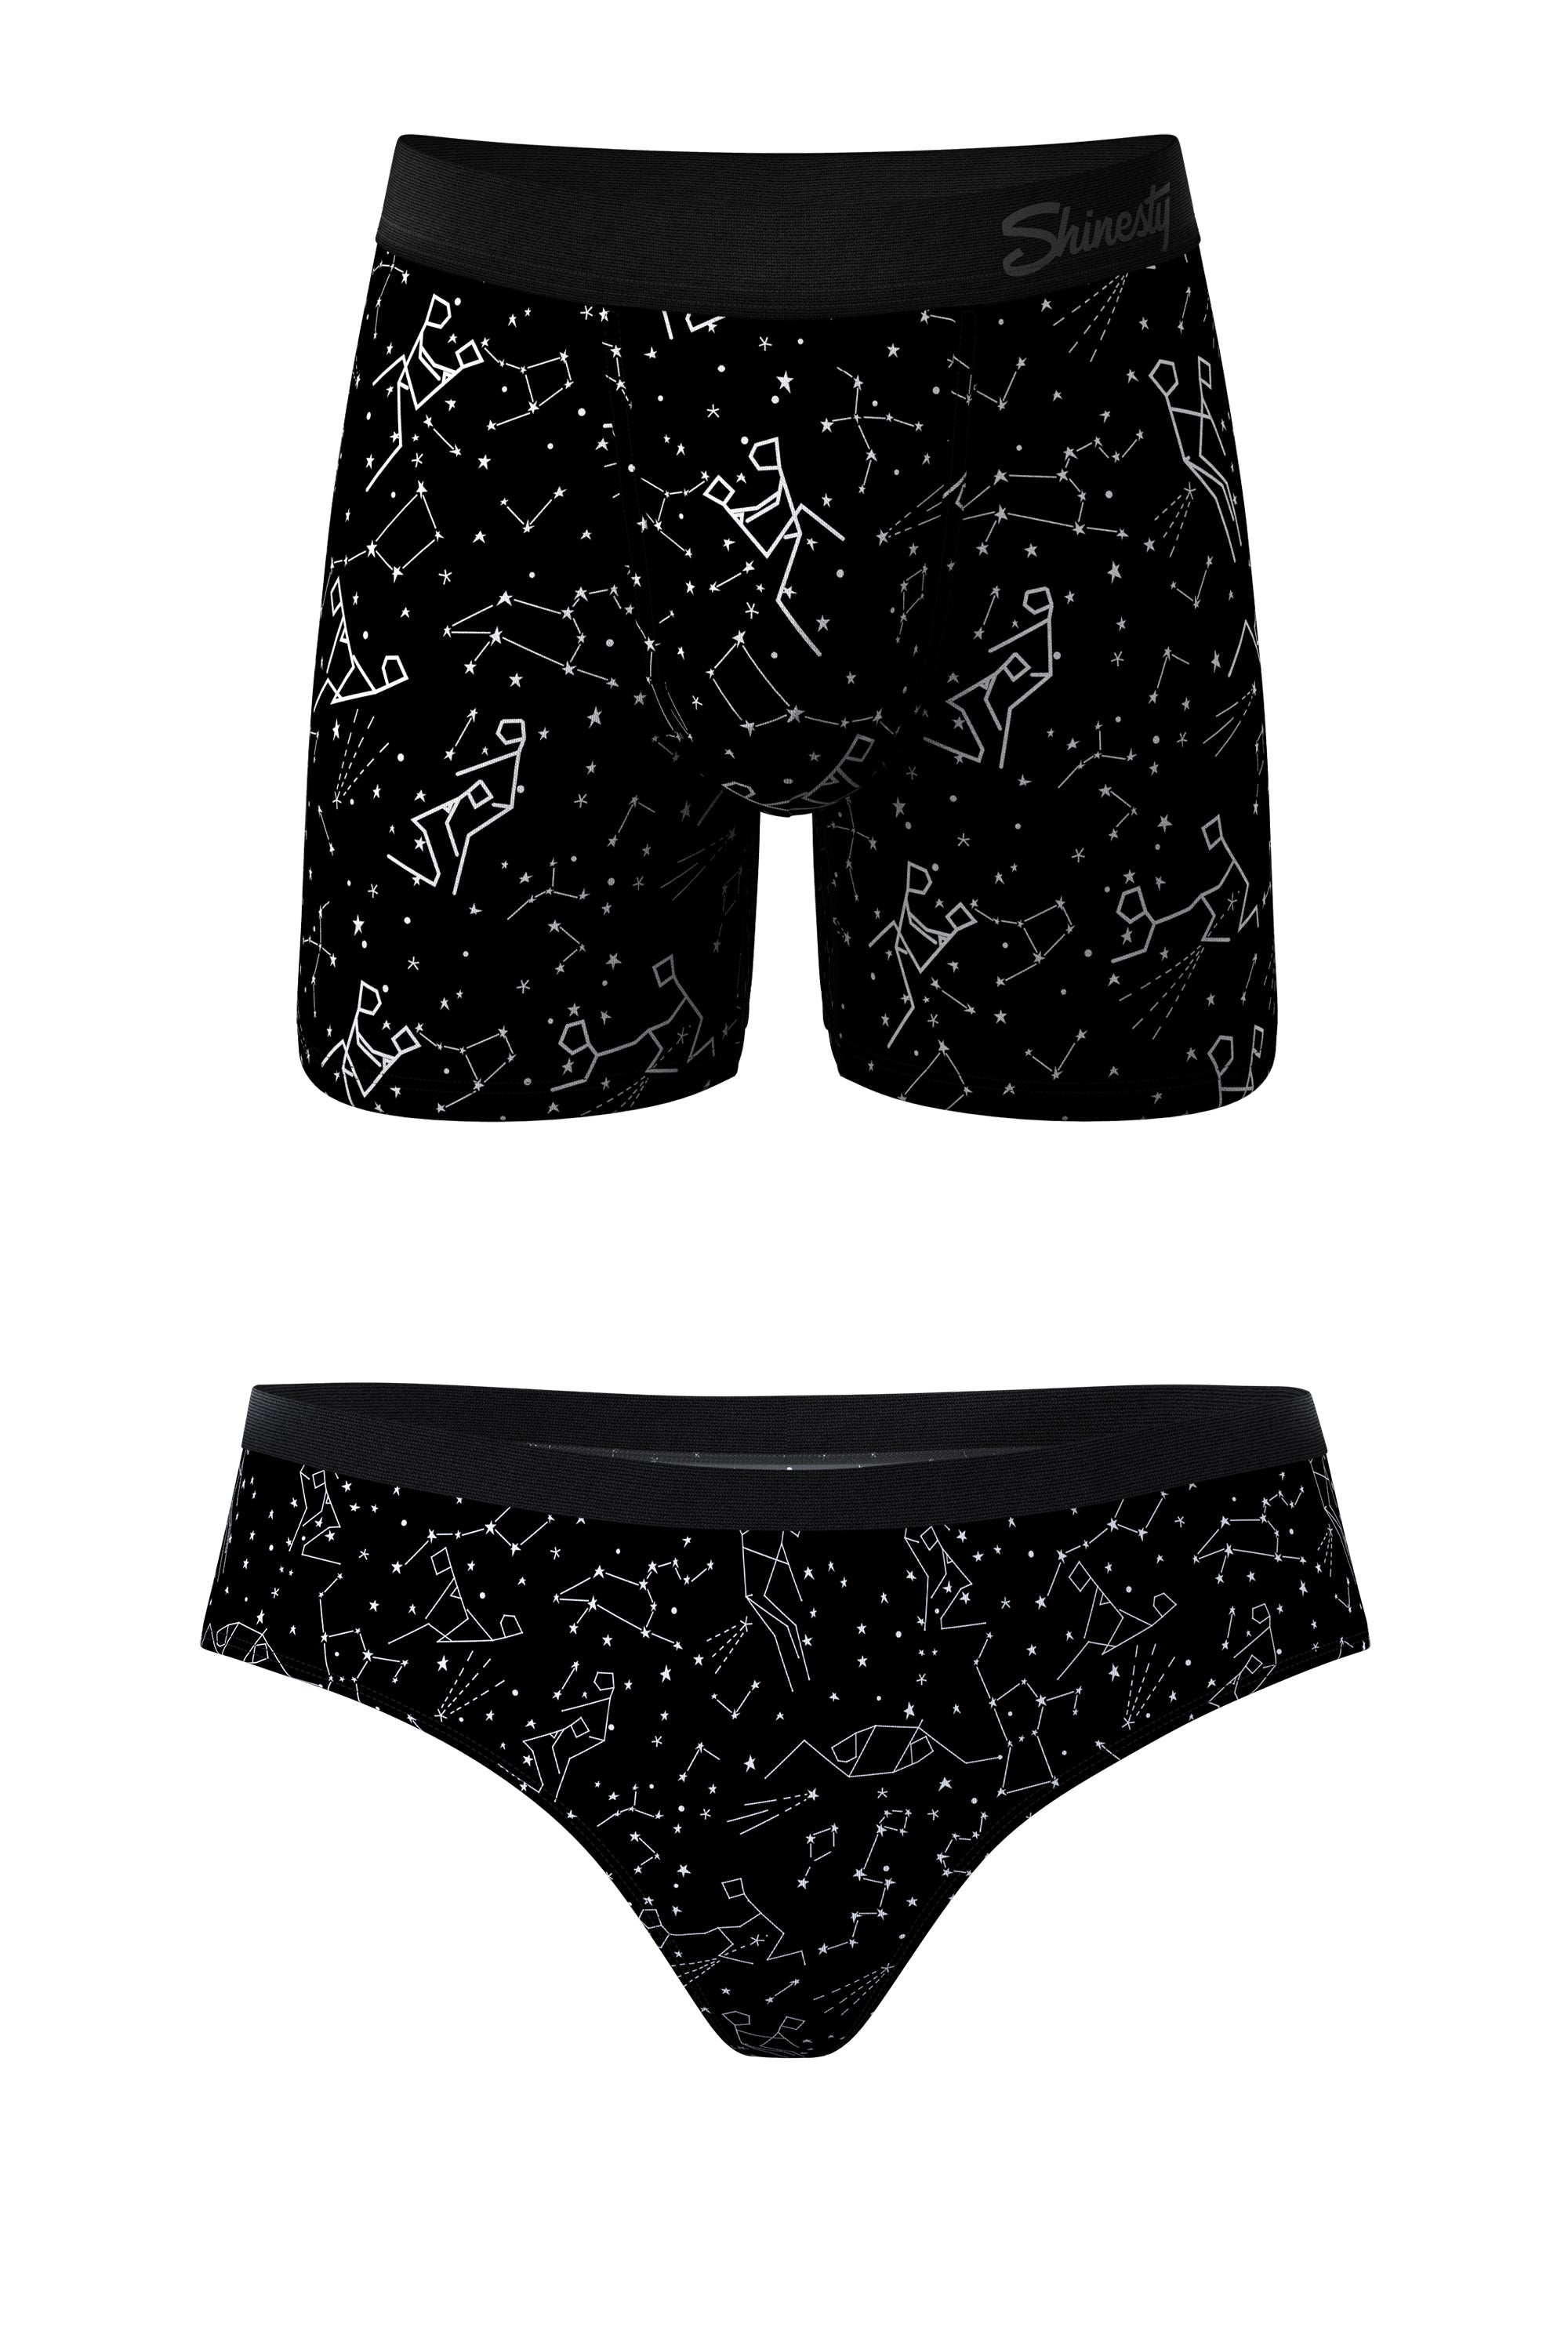 Constellation Ball Hammock® Boxer and Cheeky Matching Couples